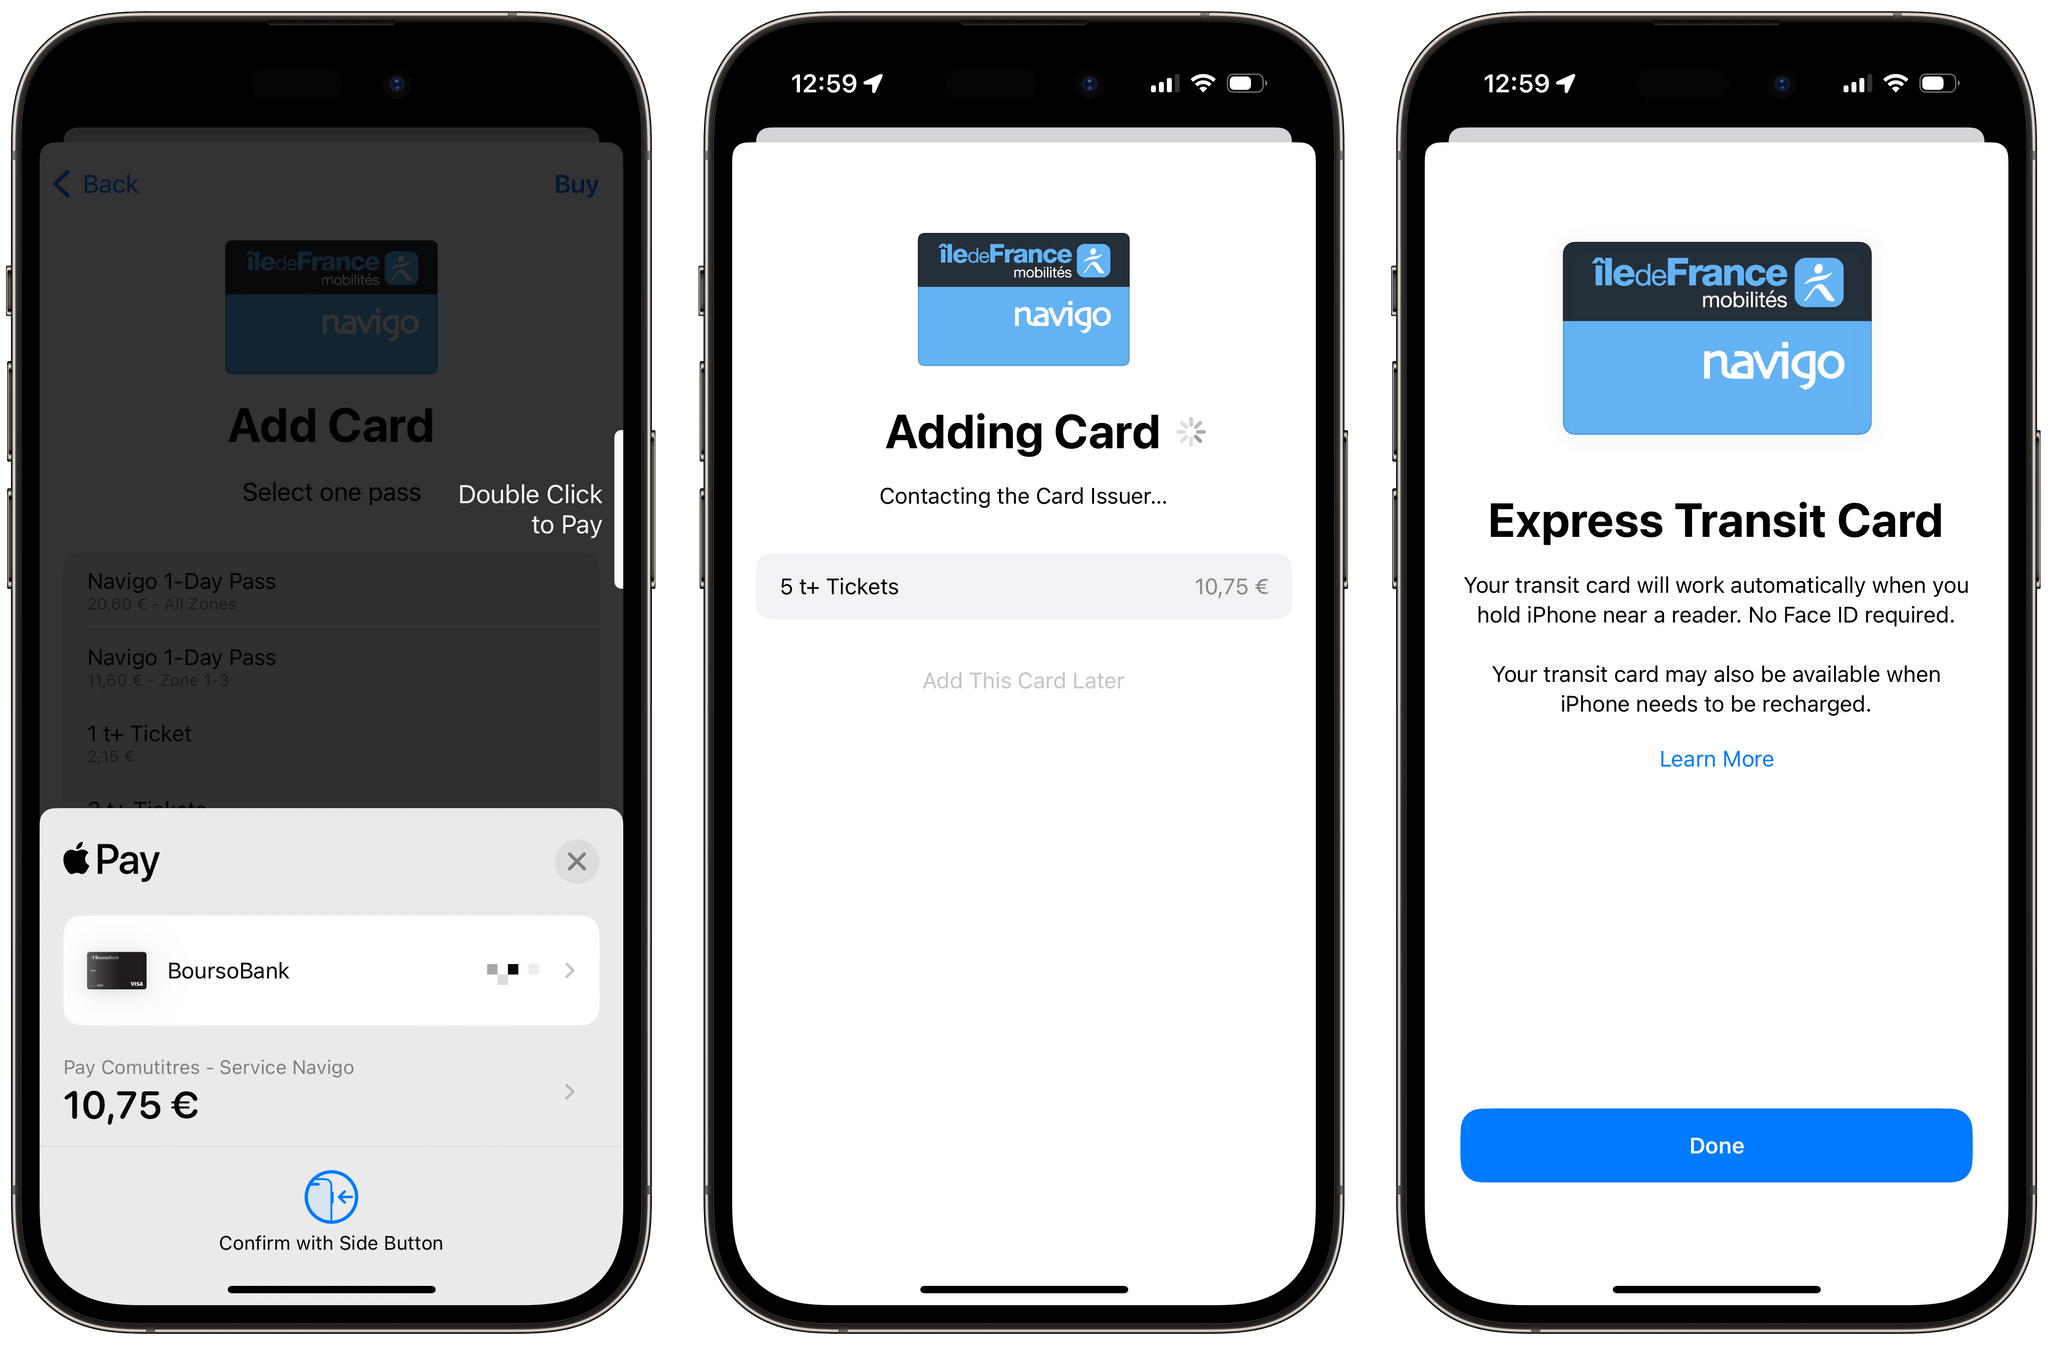 Loading tickets onto the Navigo Pass in Apple Wallet, and enabling Express Mode.